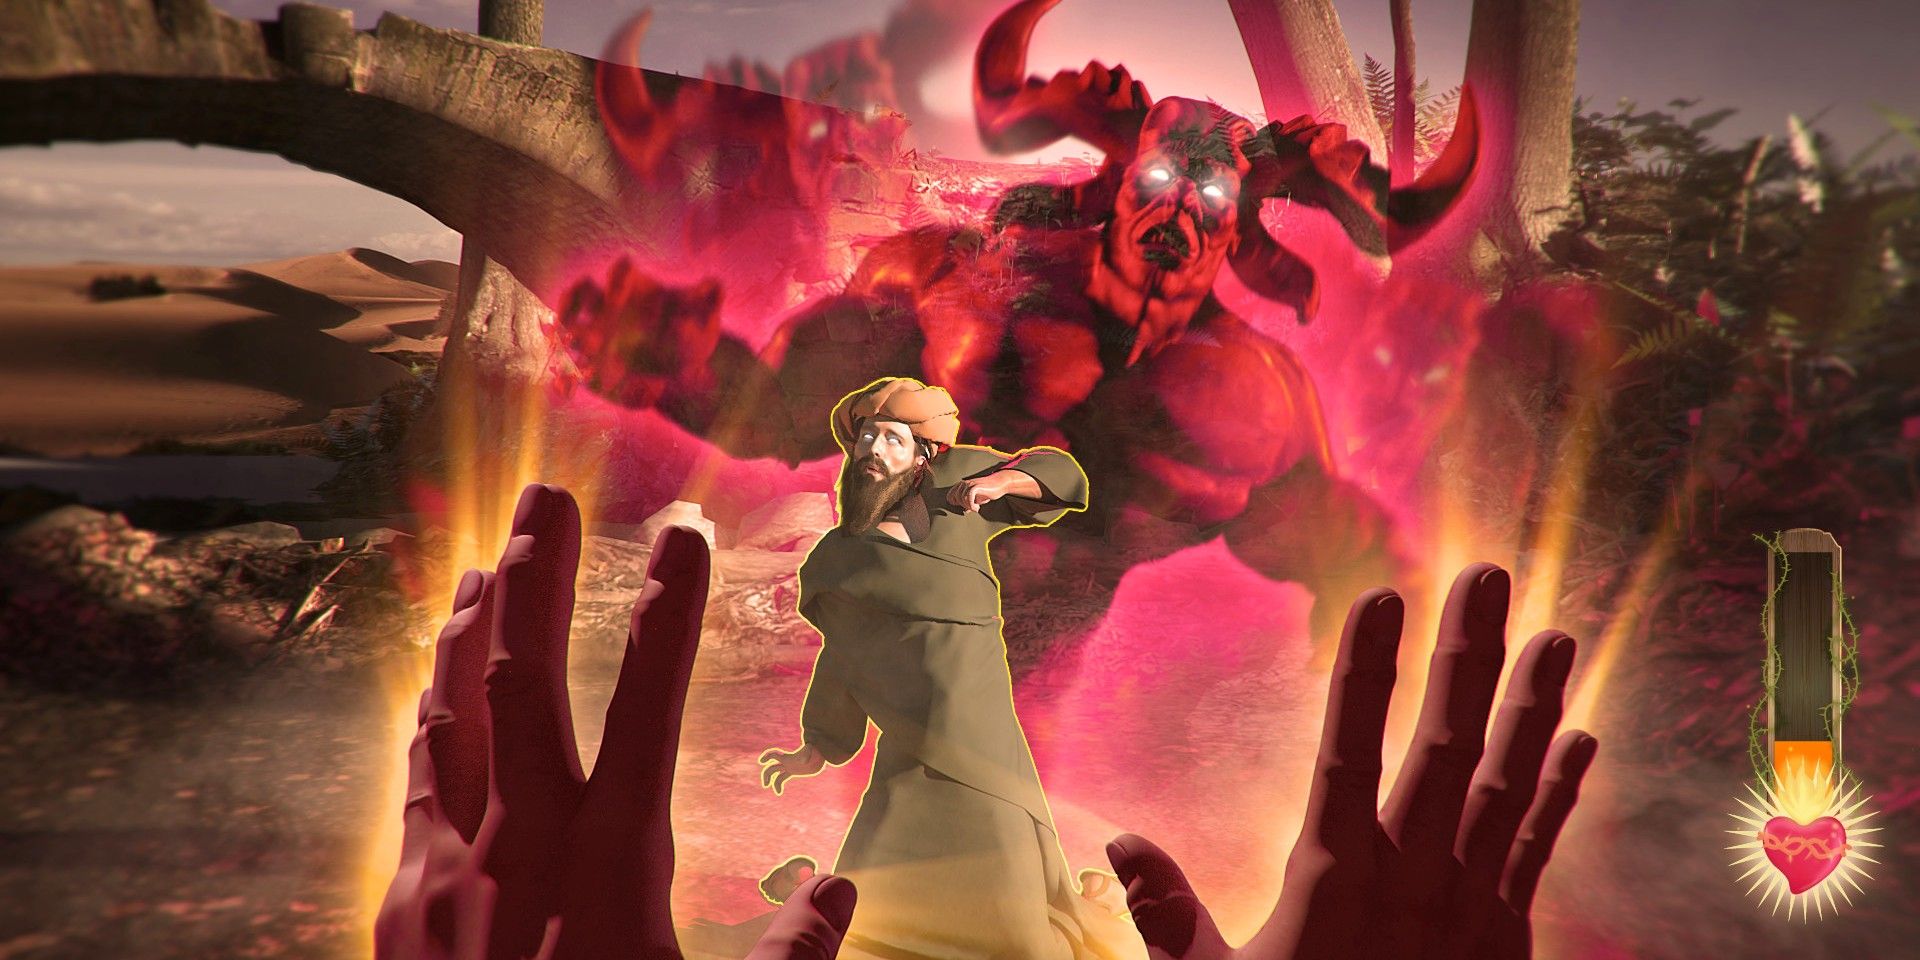 I Am Jesus Christ gameplay showing the player exorcising the devil from a human.